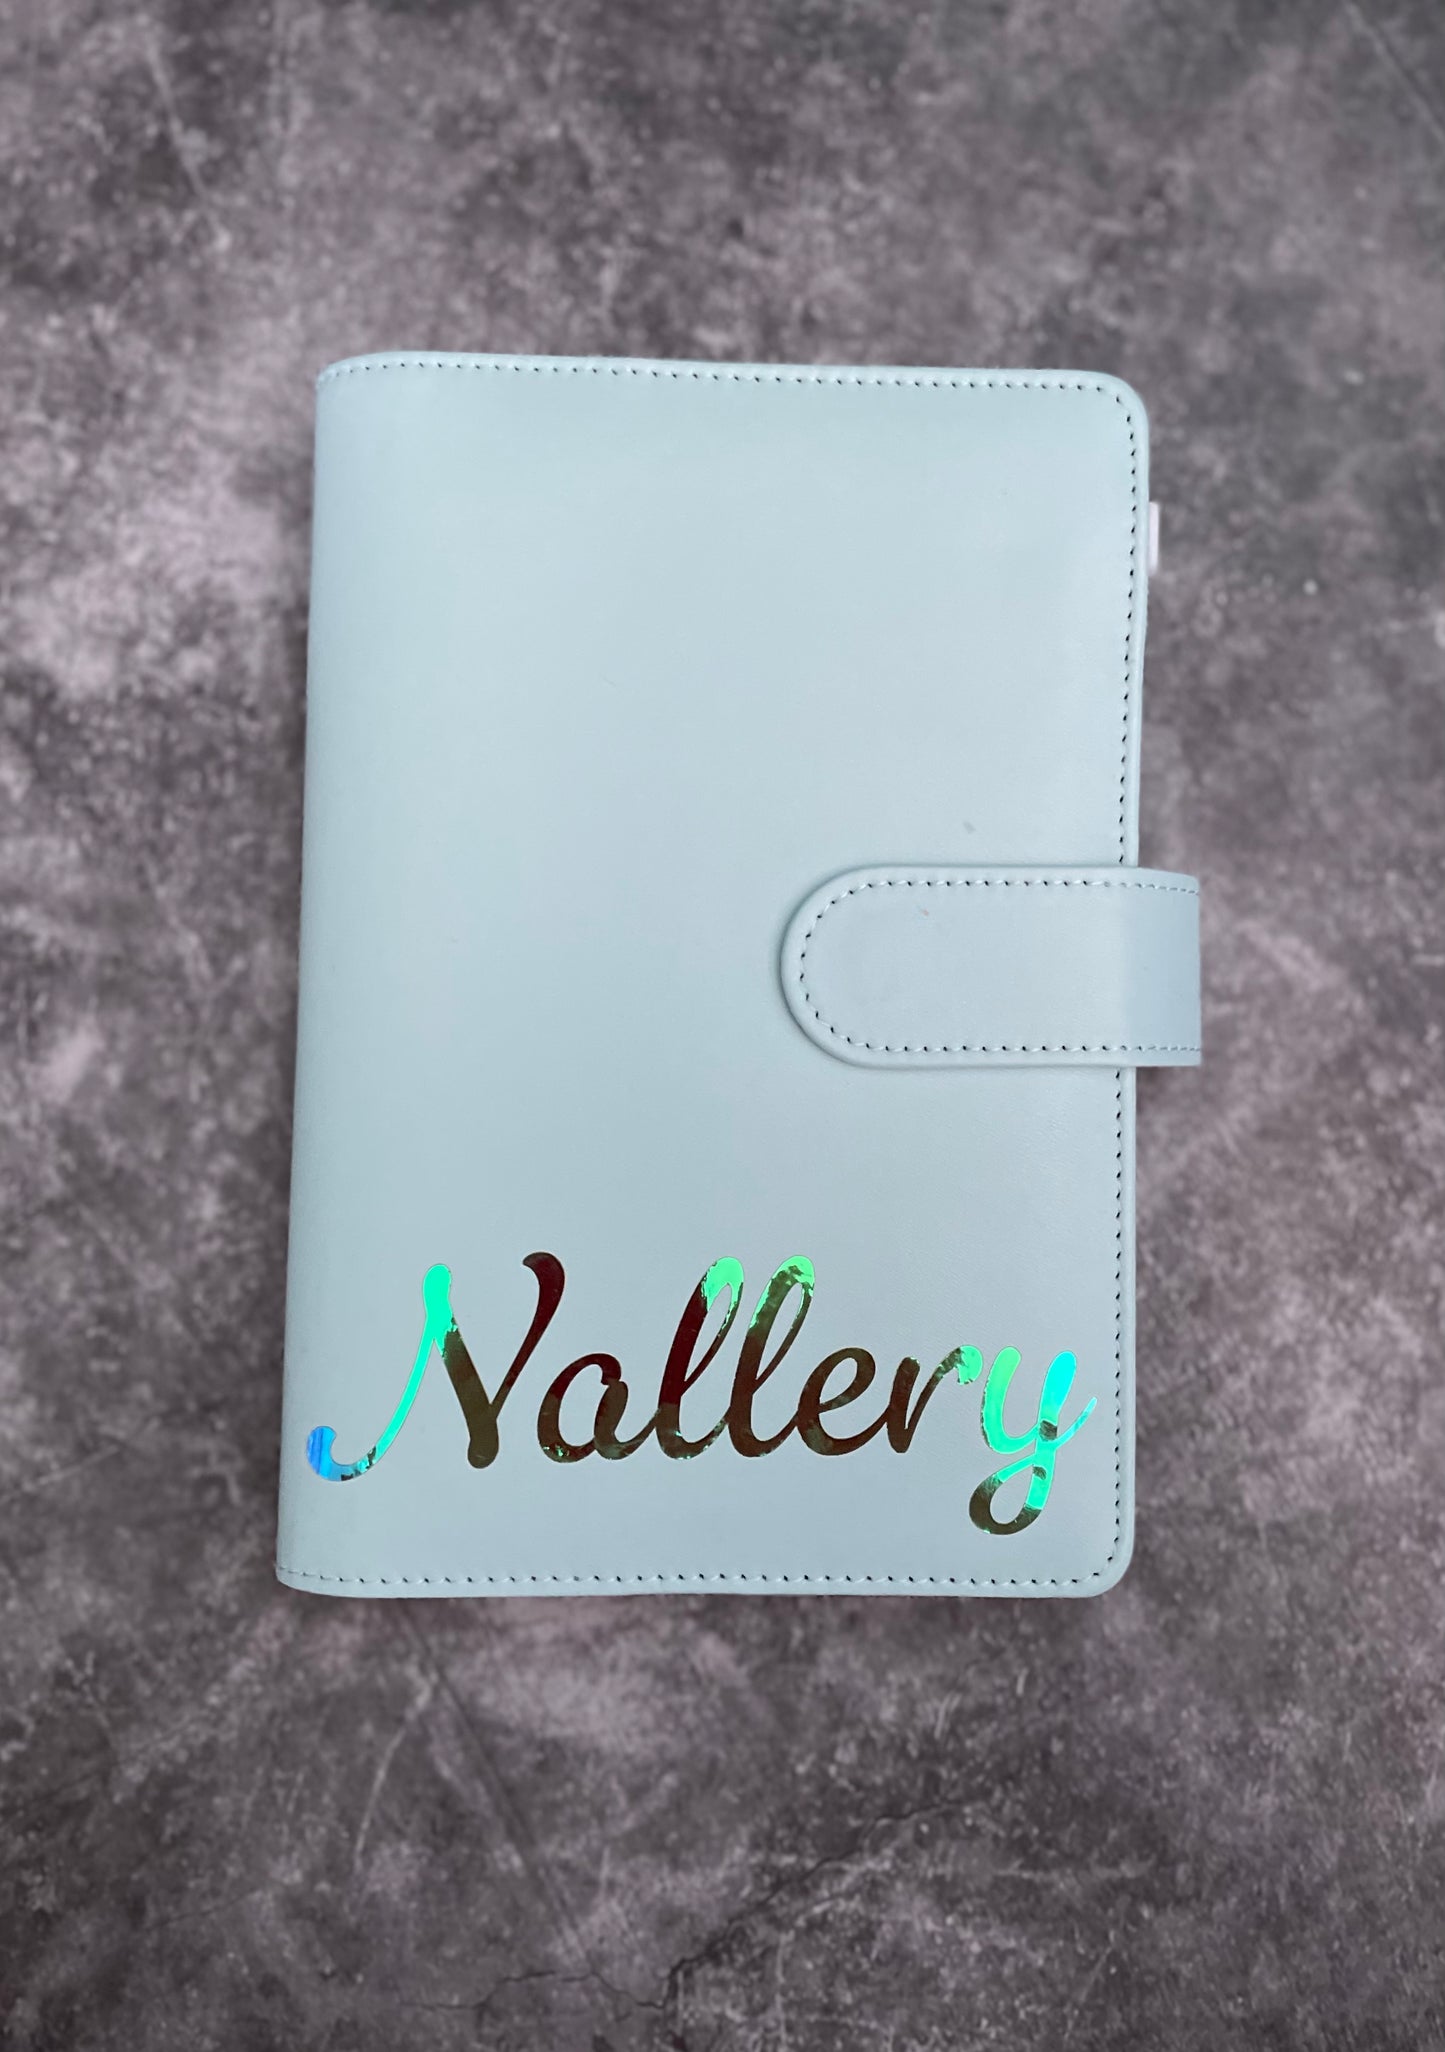 Customizable A6 Budget Binder with Envelopes and Balance Sheets, 6 Ring Binder, Money Wallet, Personalized Wallets, Personalized Binders, A6 Notebook Binder